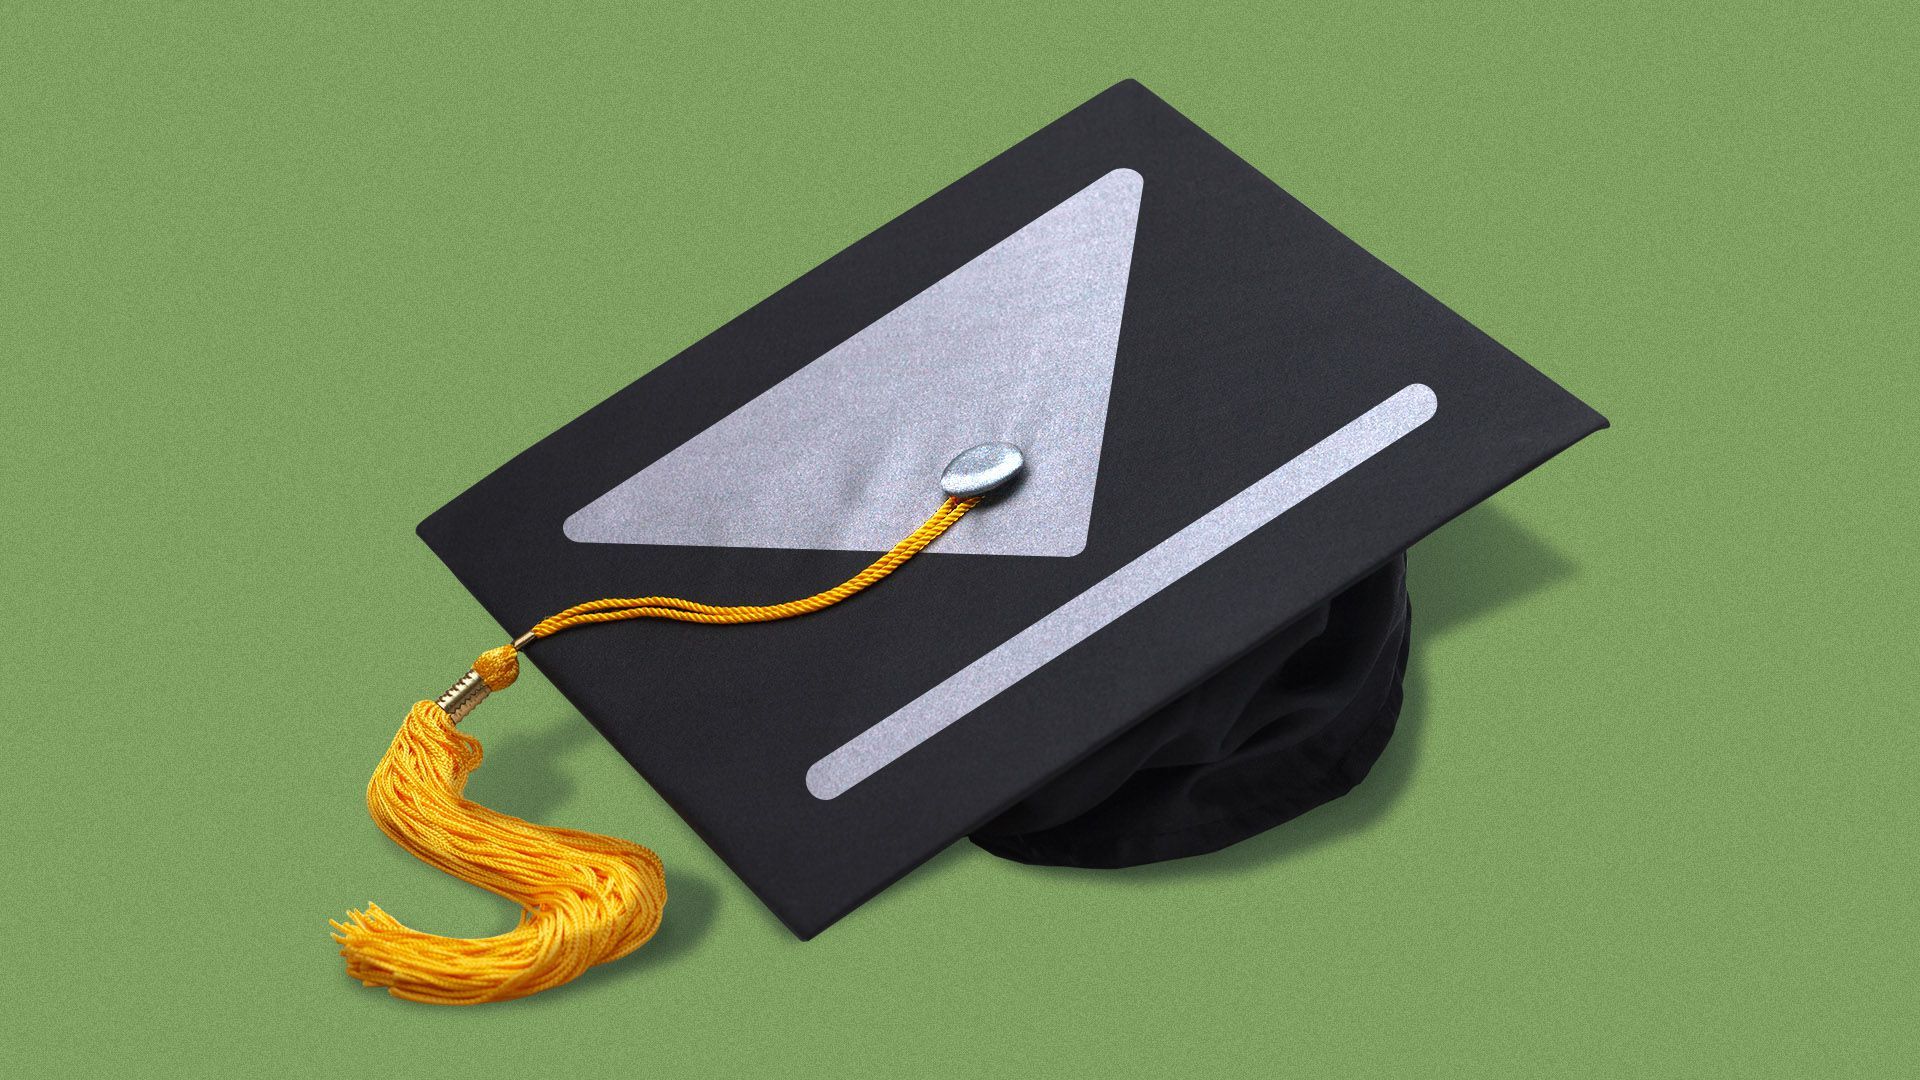 Illustration of a graduation mortarboard with a 